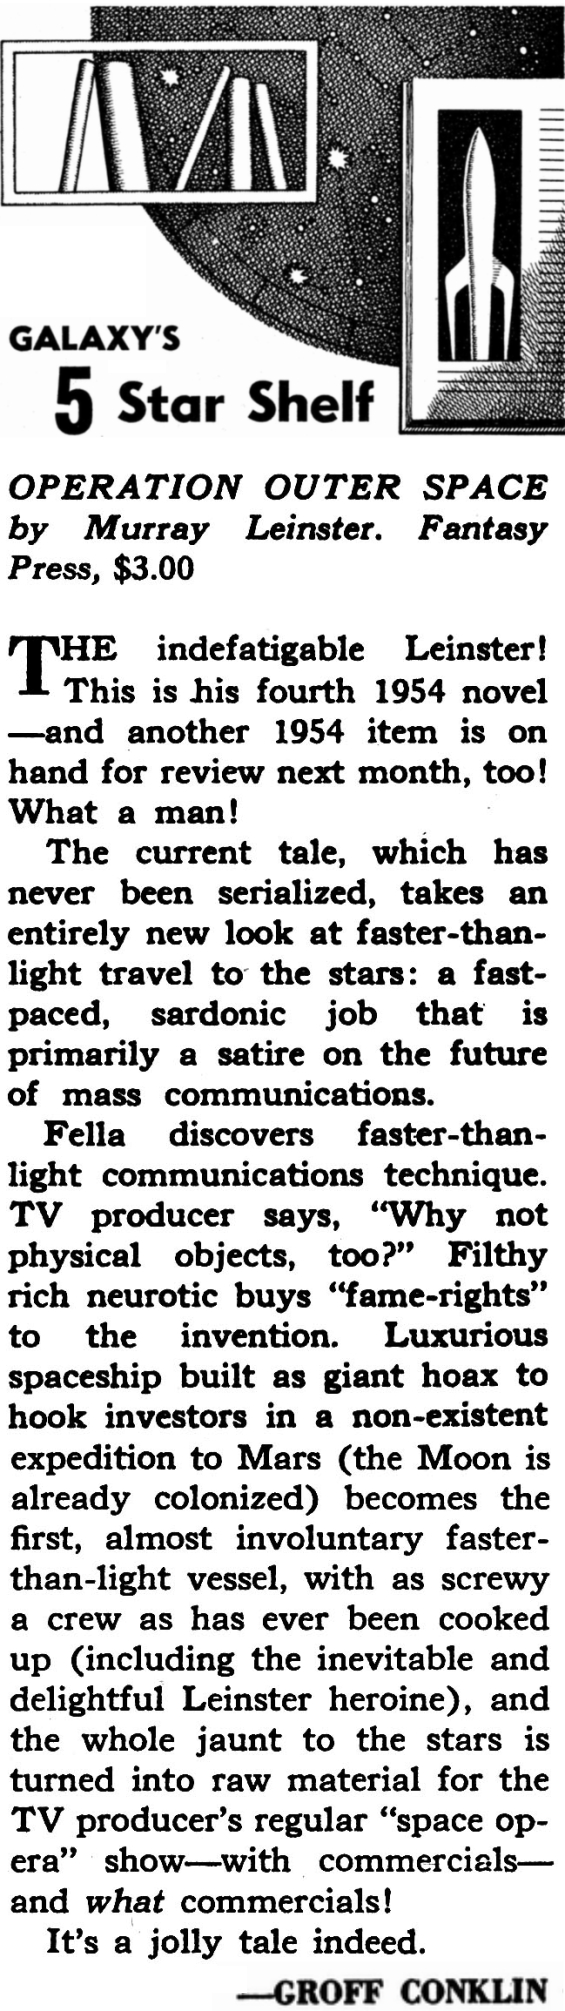 Groff Conklin's review of Operation: Outer Space from Galaxy Magazine's March 1955 issue